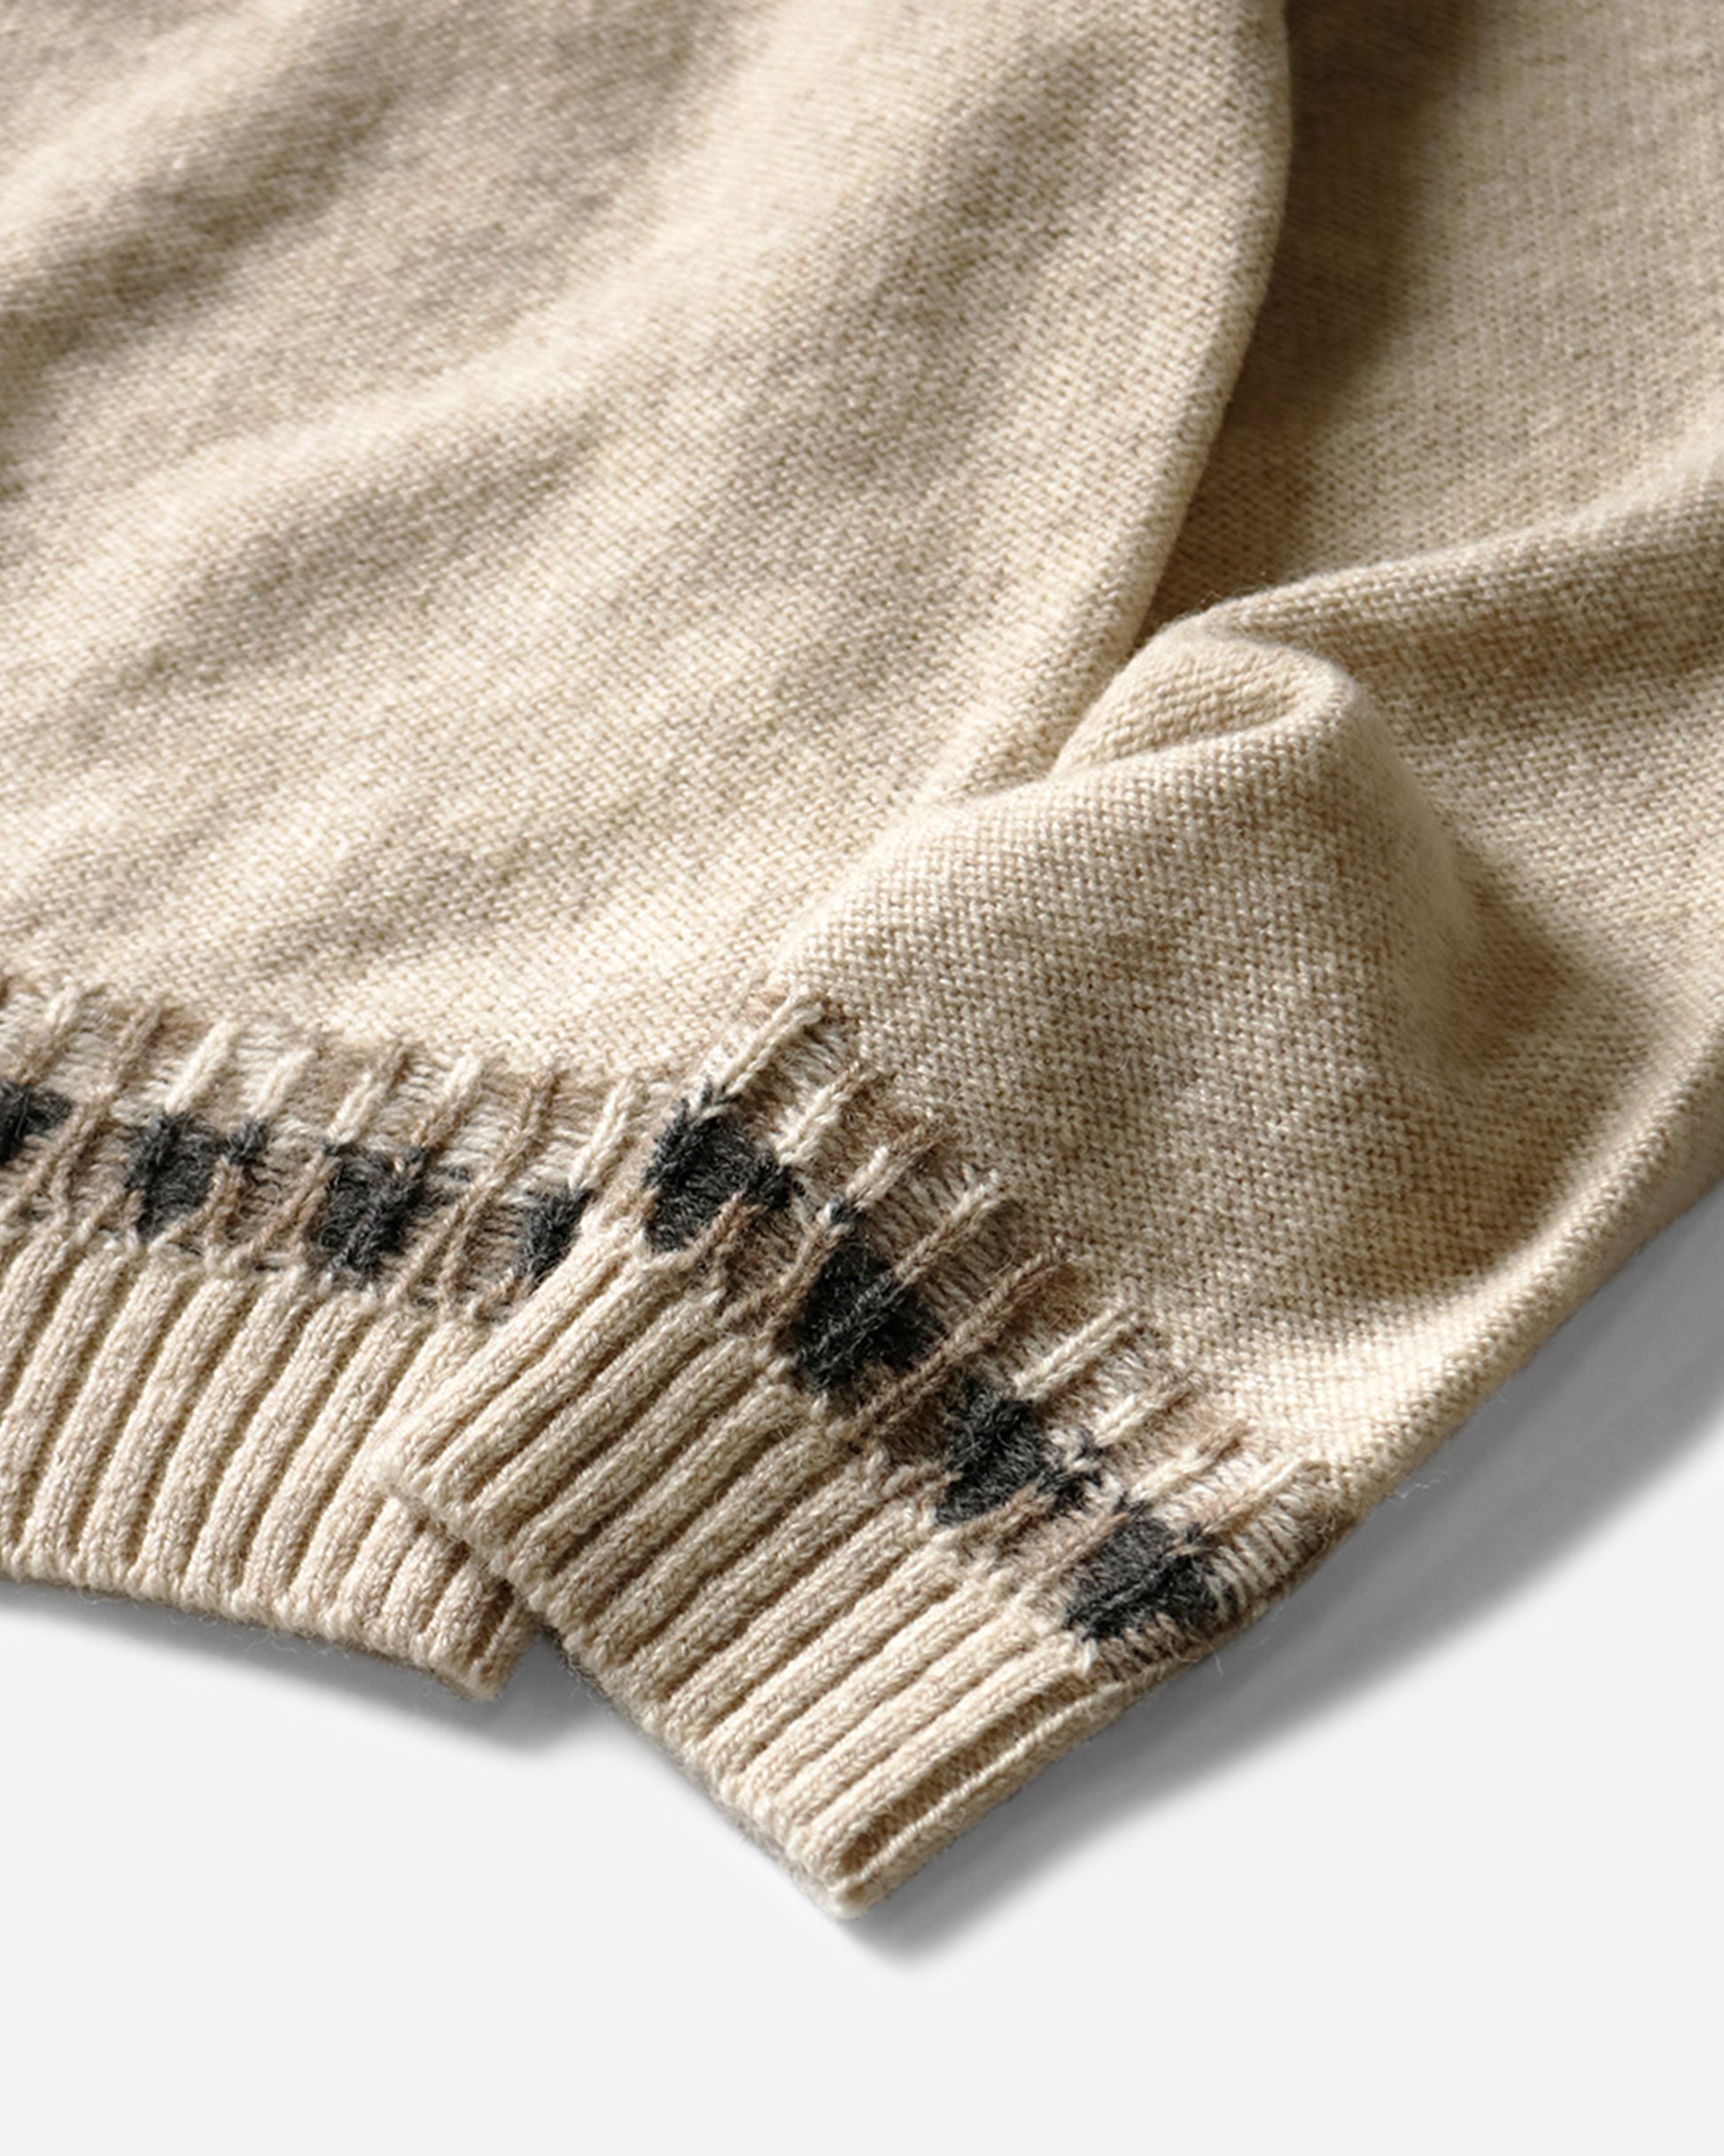 A close up on the sleeves of the Nordic smiley sweater.